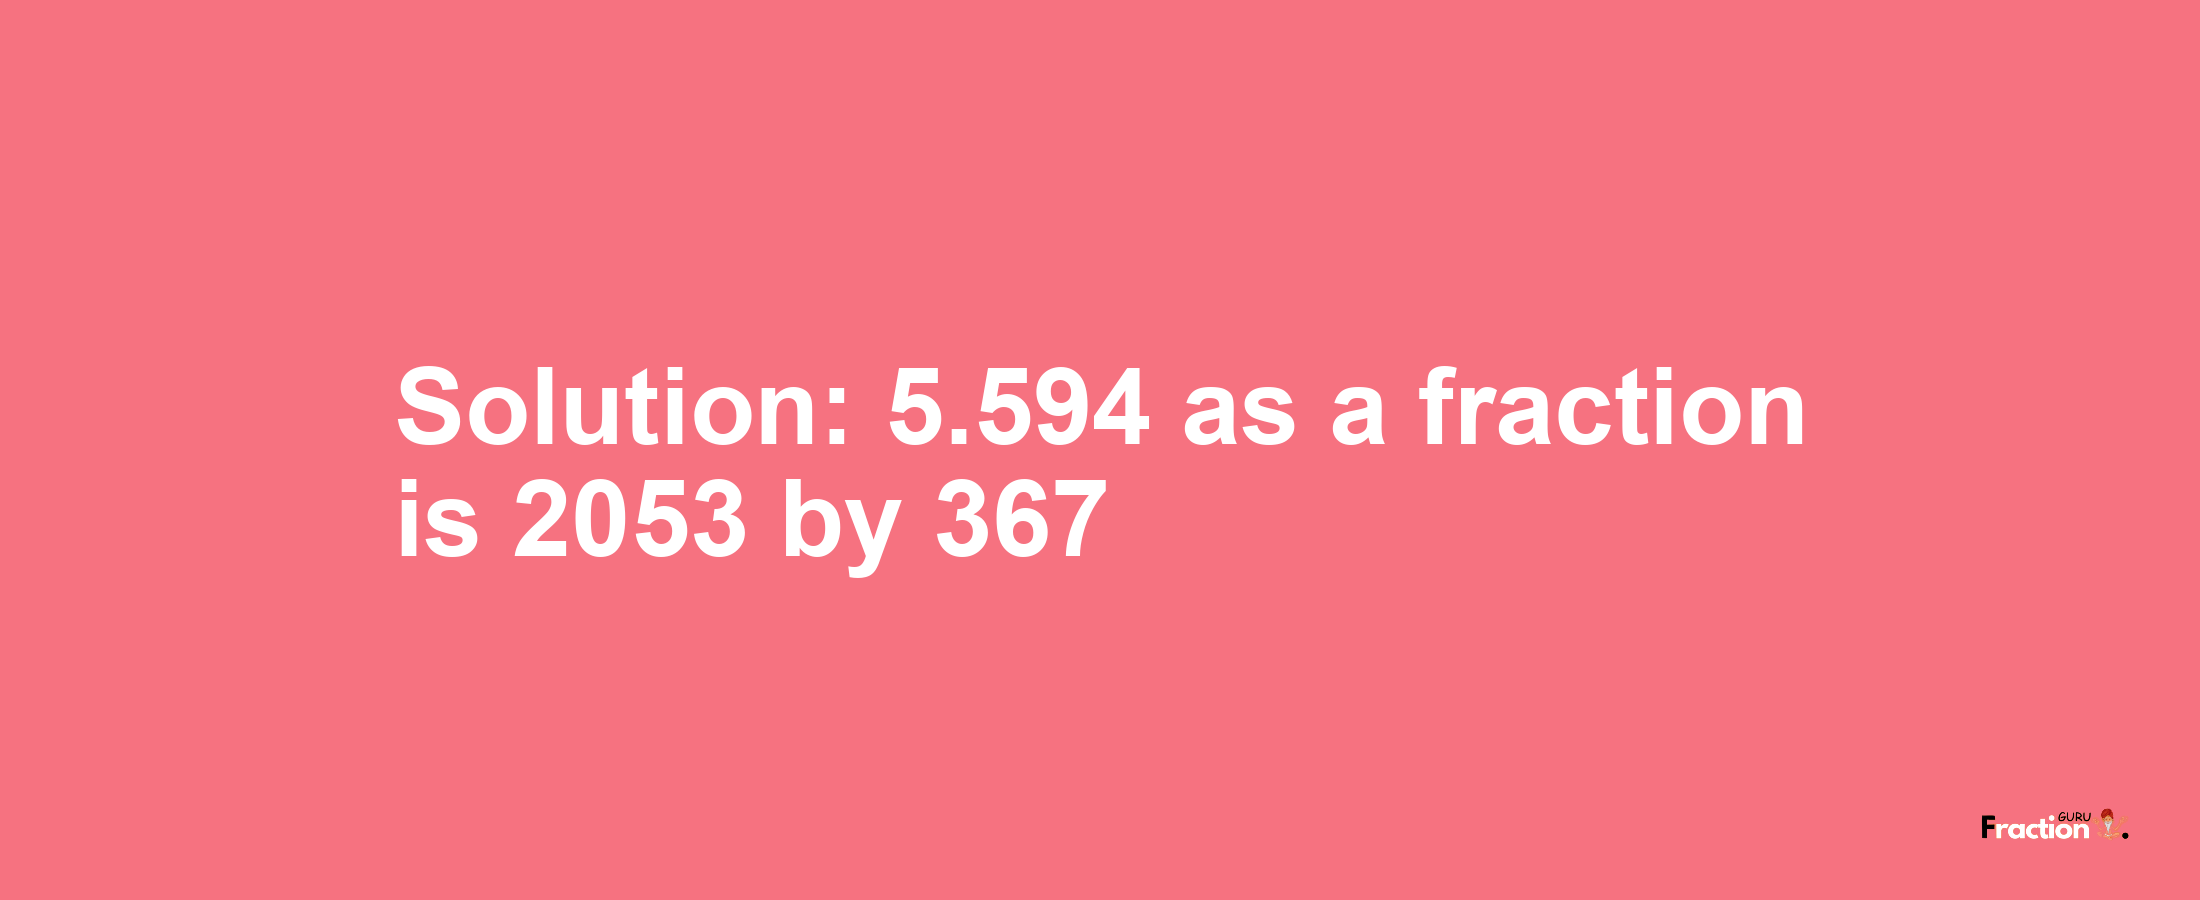 Solution:5.594 as a fraction is 2053/367